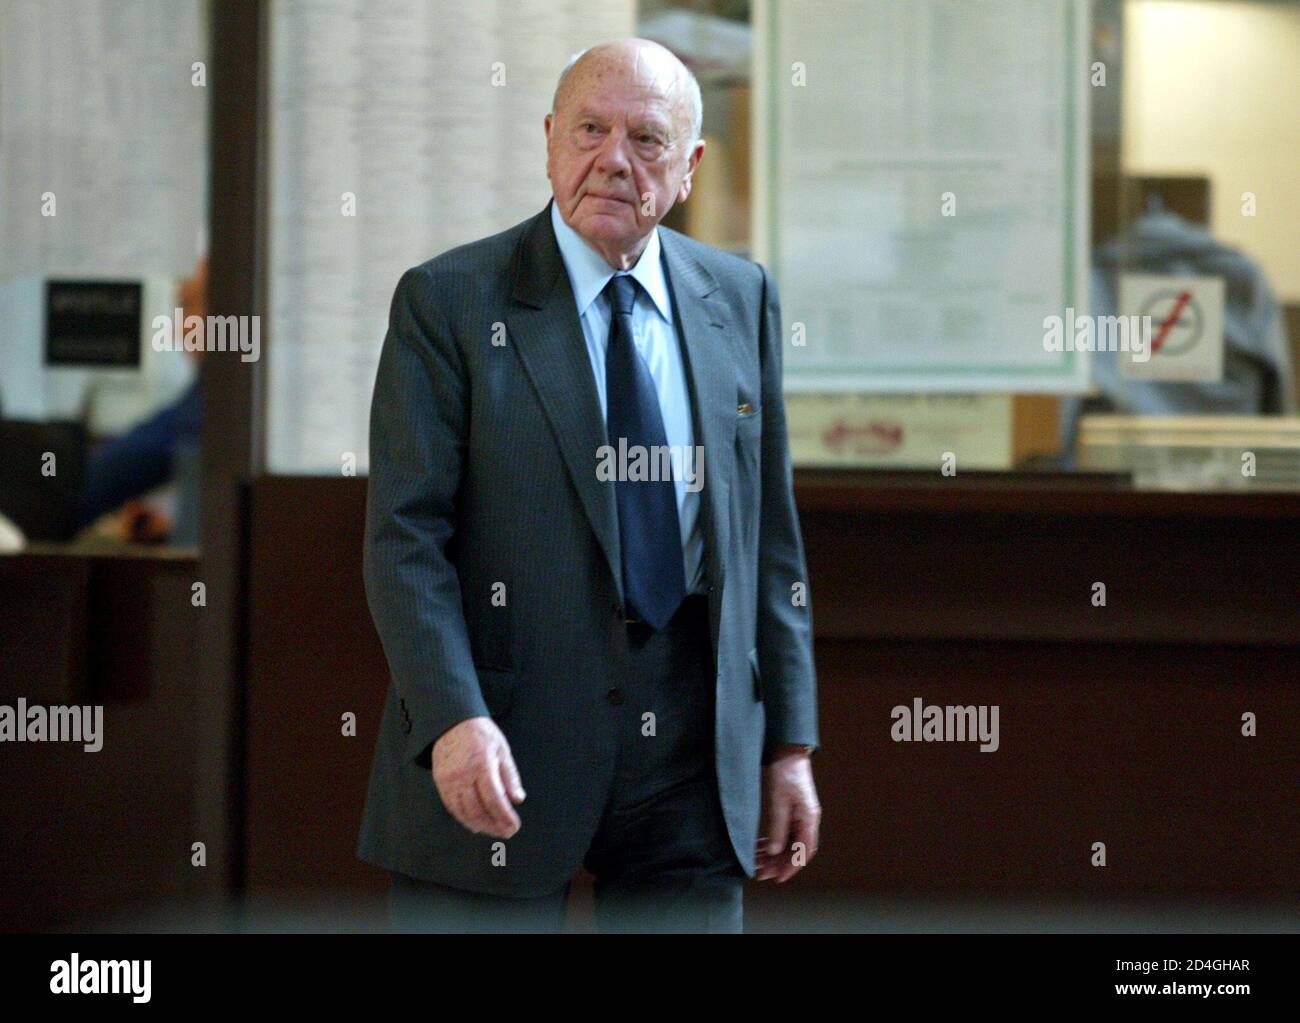 Andre Tarallo of France, former Elf-Aquitaine senior executive walks in the  halls of Paris's main courthouse during a break in the Elf trial, April 28,  2003 Foto stock - Alamy